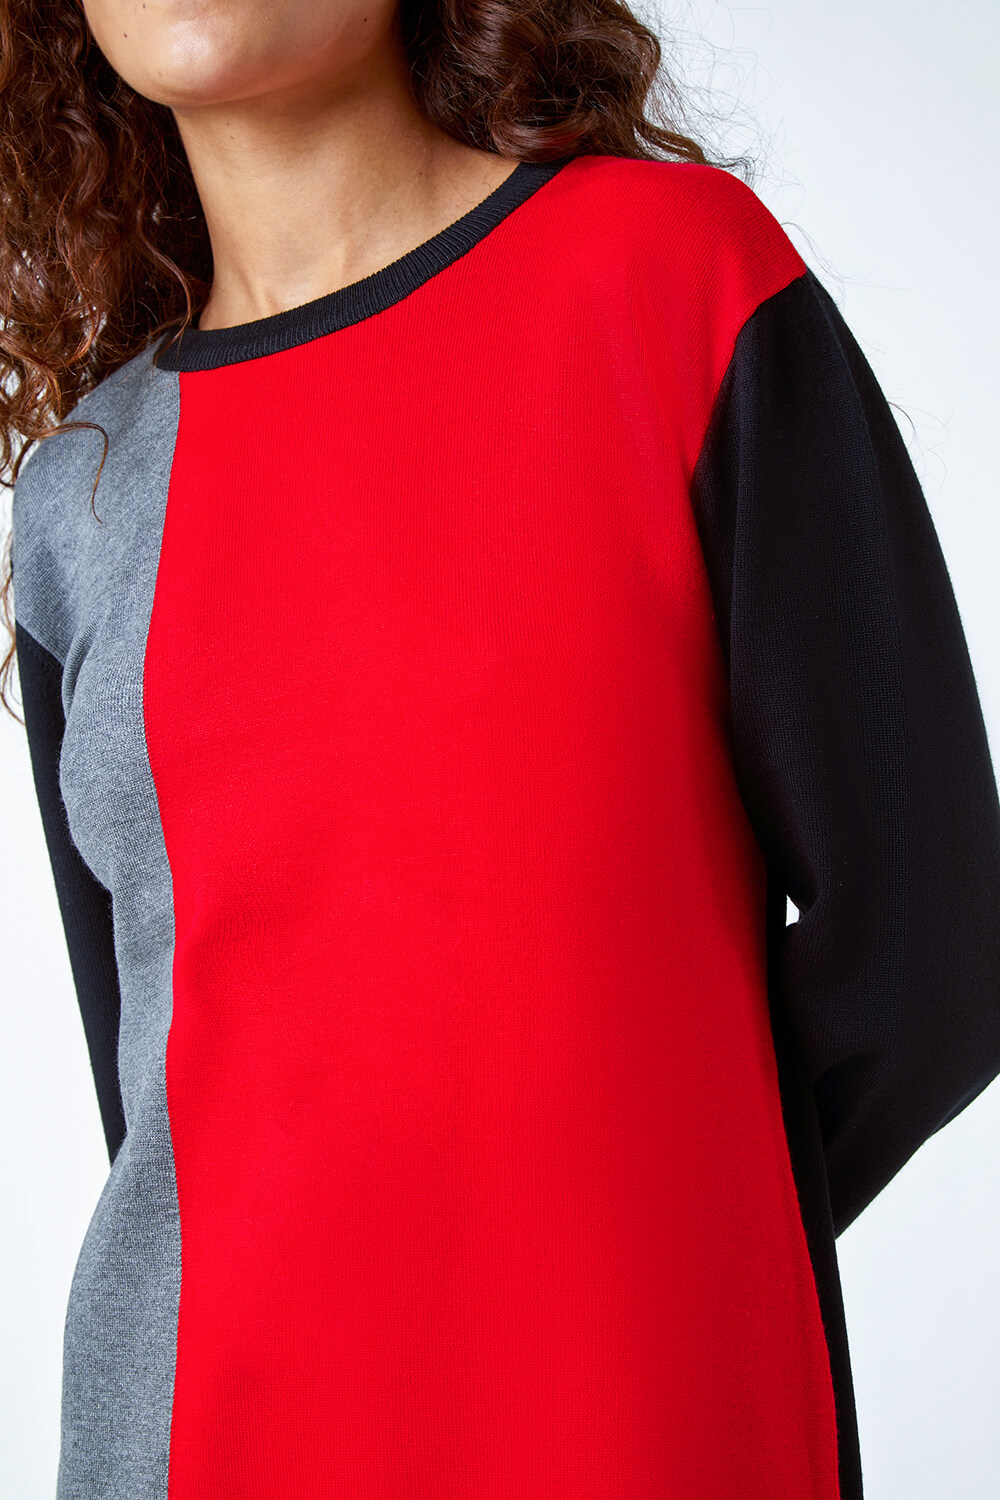 Red Colour Block Knitted Jumper Dress, Image 5 of 5